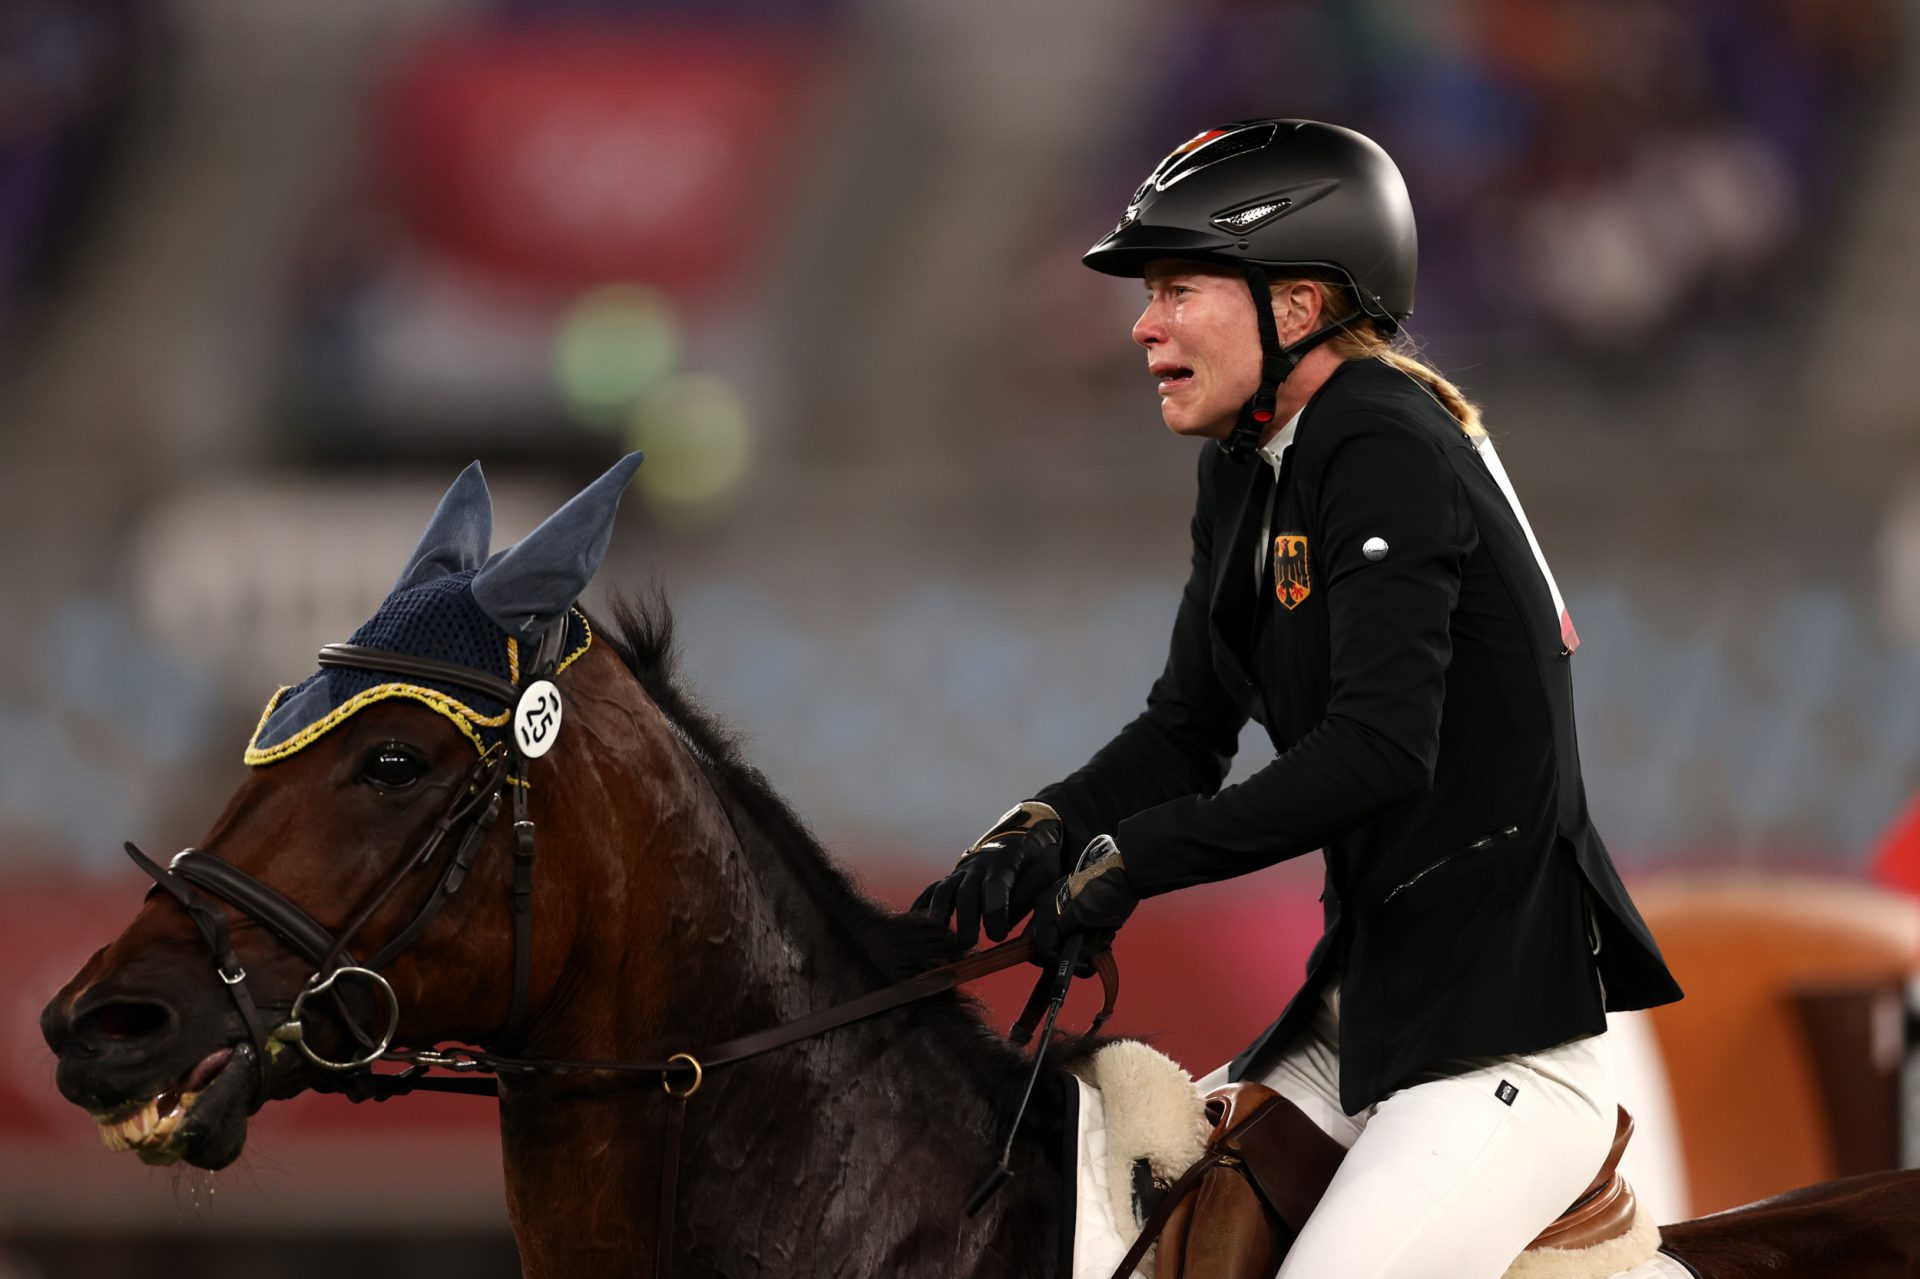 Coach Kicked Out of Olympics After Allegedly Punching Horse